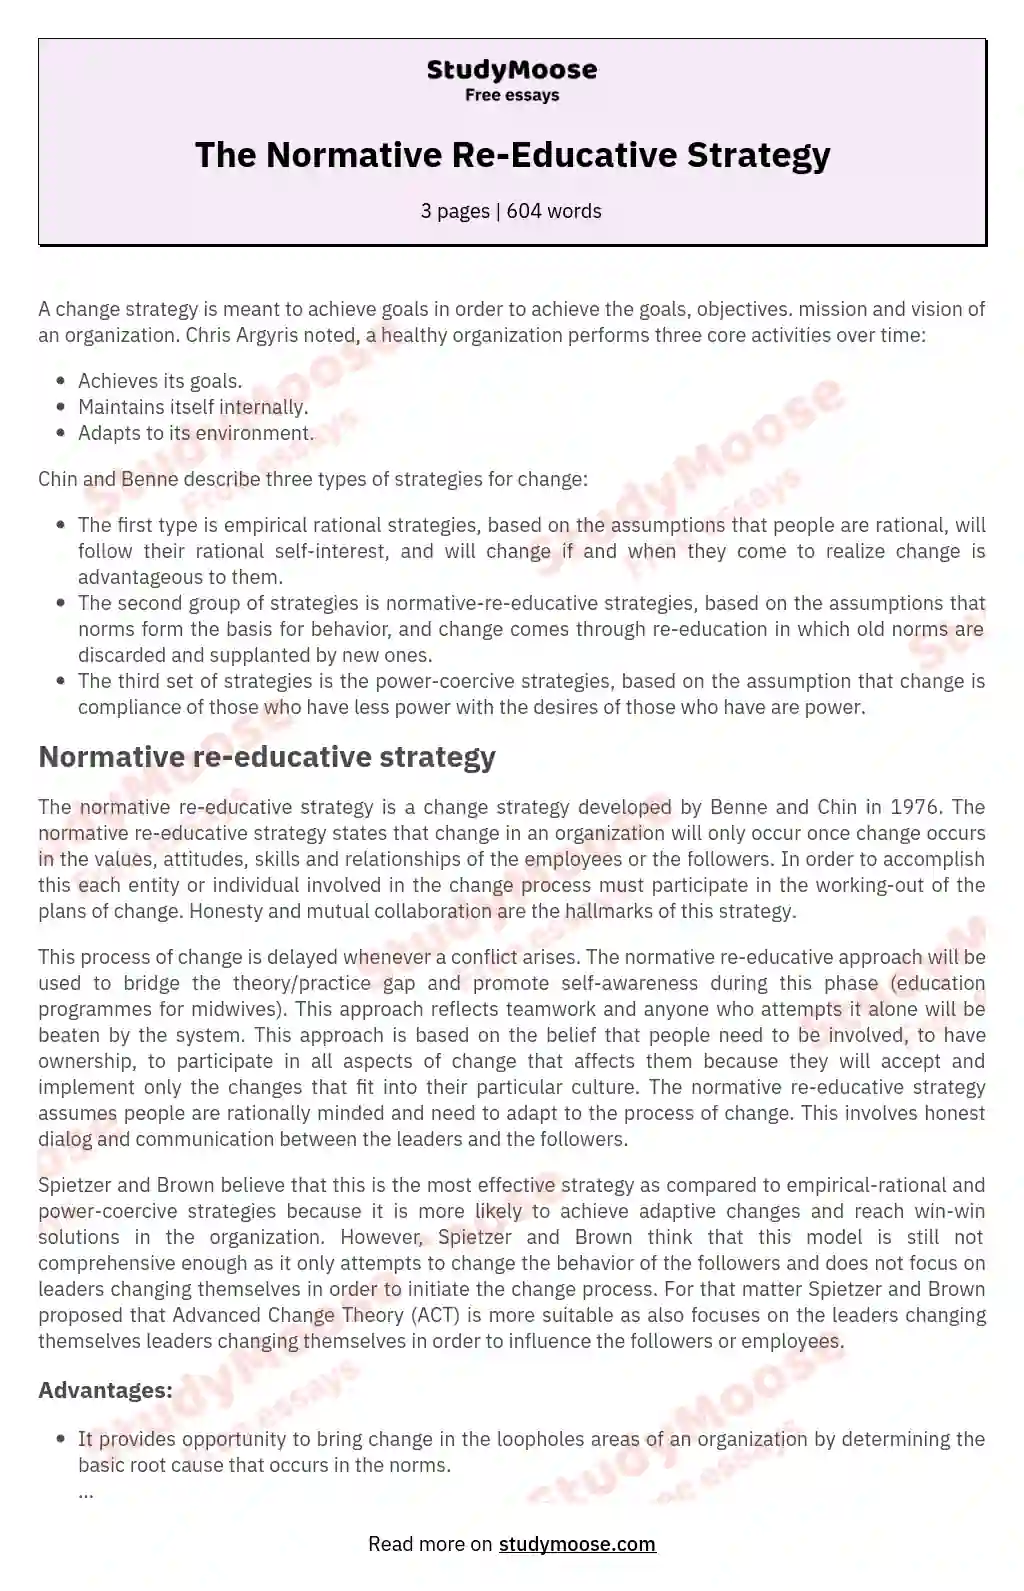 The Normative Re-Educative Strategy essay